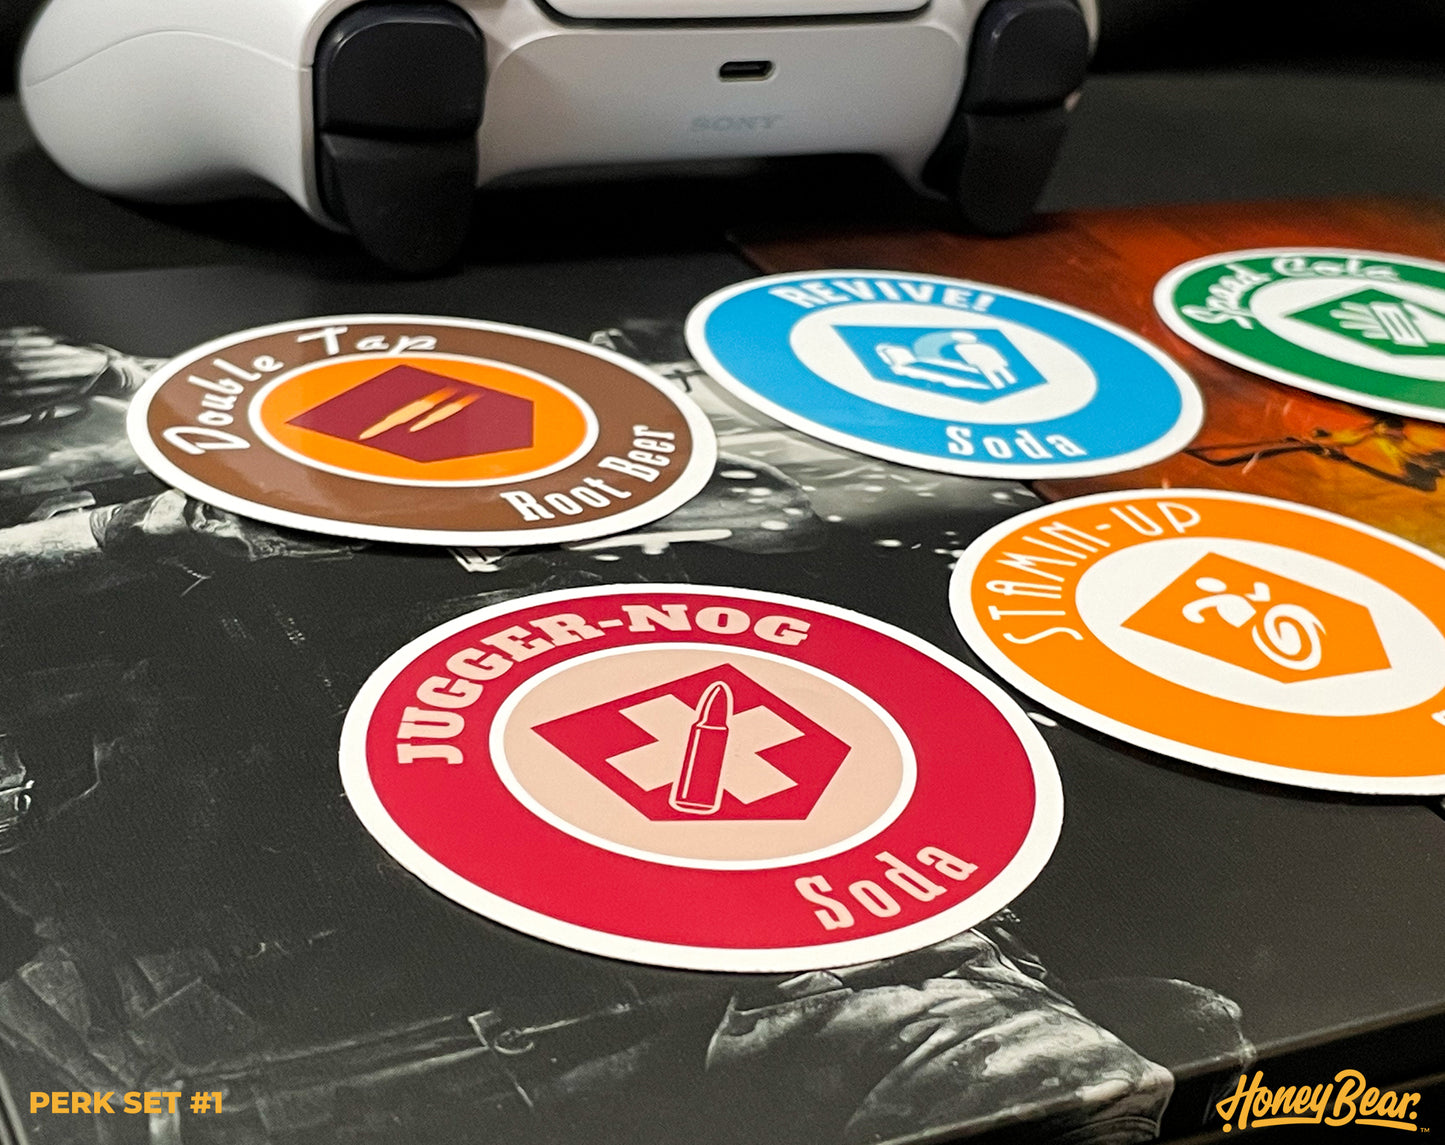 Collection of vinyl stickers featuring iconic perks from popular zombie survival games, perfect for personalizing electronics.